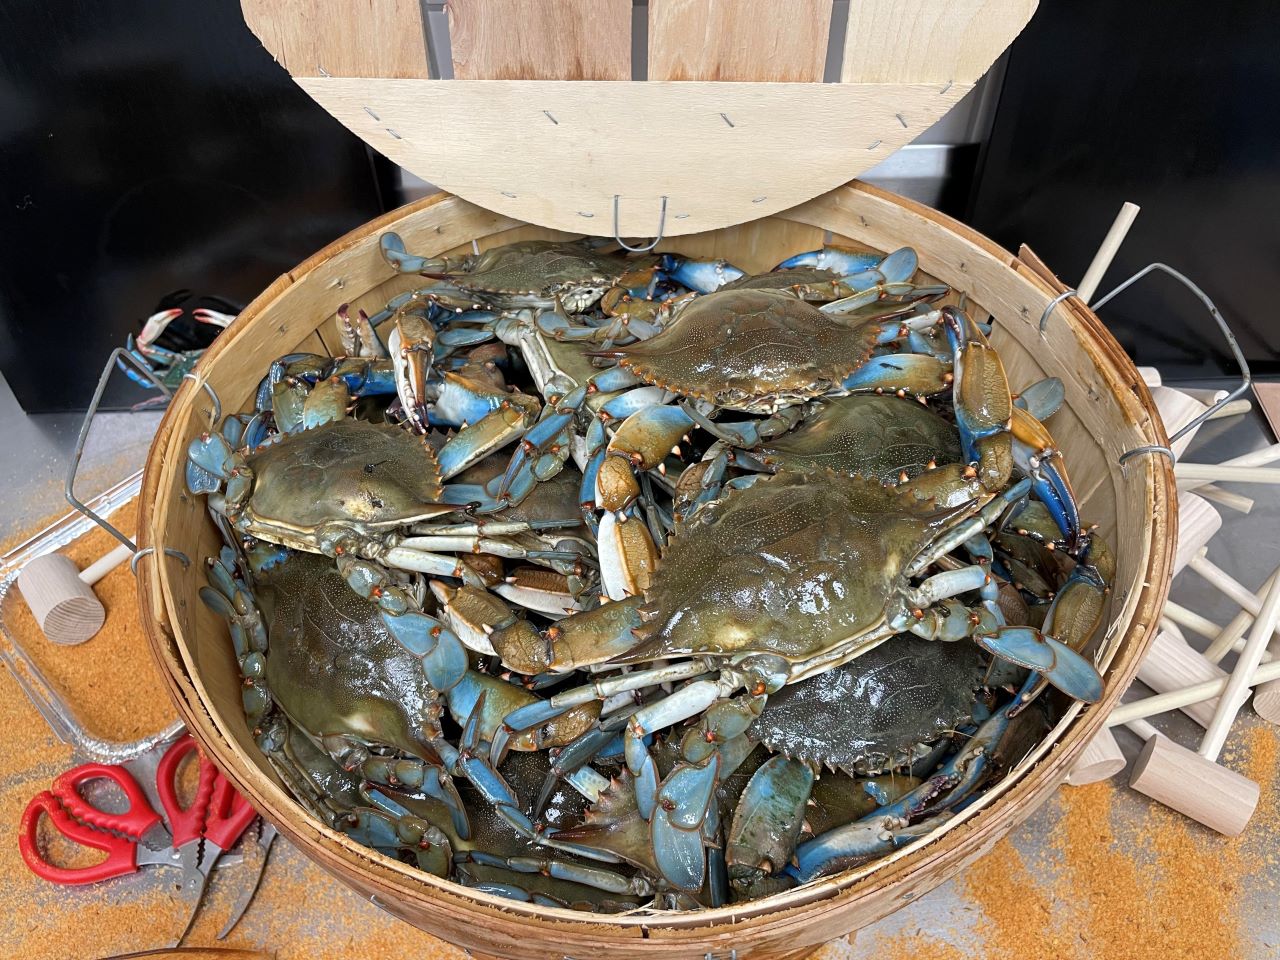 LIVE} Male Maryland Blue Crabs by the Bushel-(1 lb. Crab Spice)